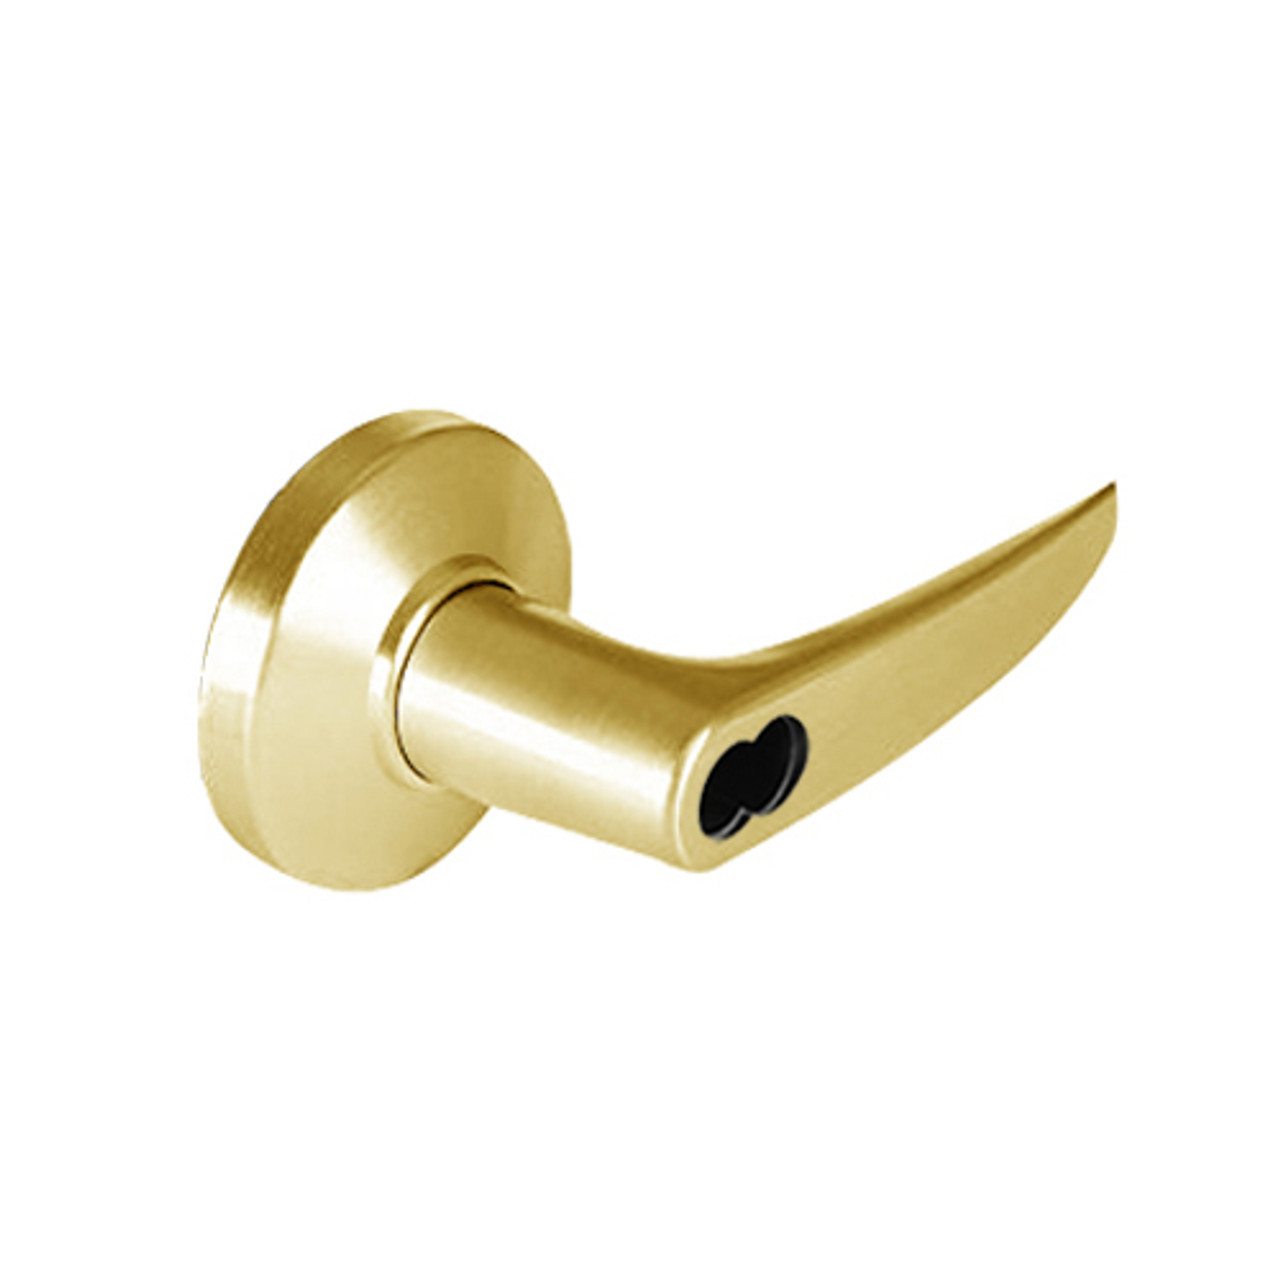 9K37RD16CS3605LM Best 9K Series Special Function Cylindrical Lever Locks with Curved without Return Lever Design Accept 7 Pin Best Core in Bright Brass